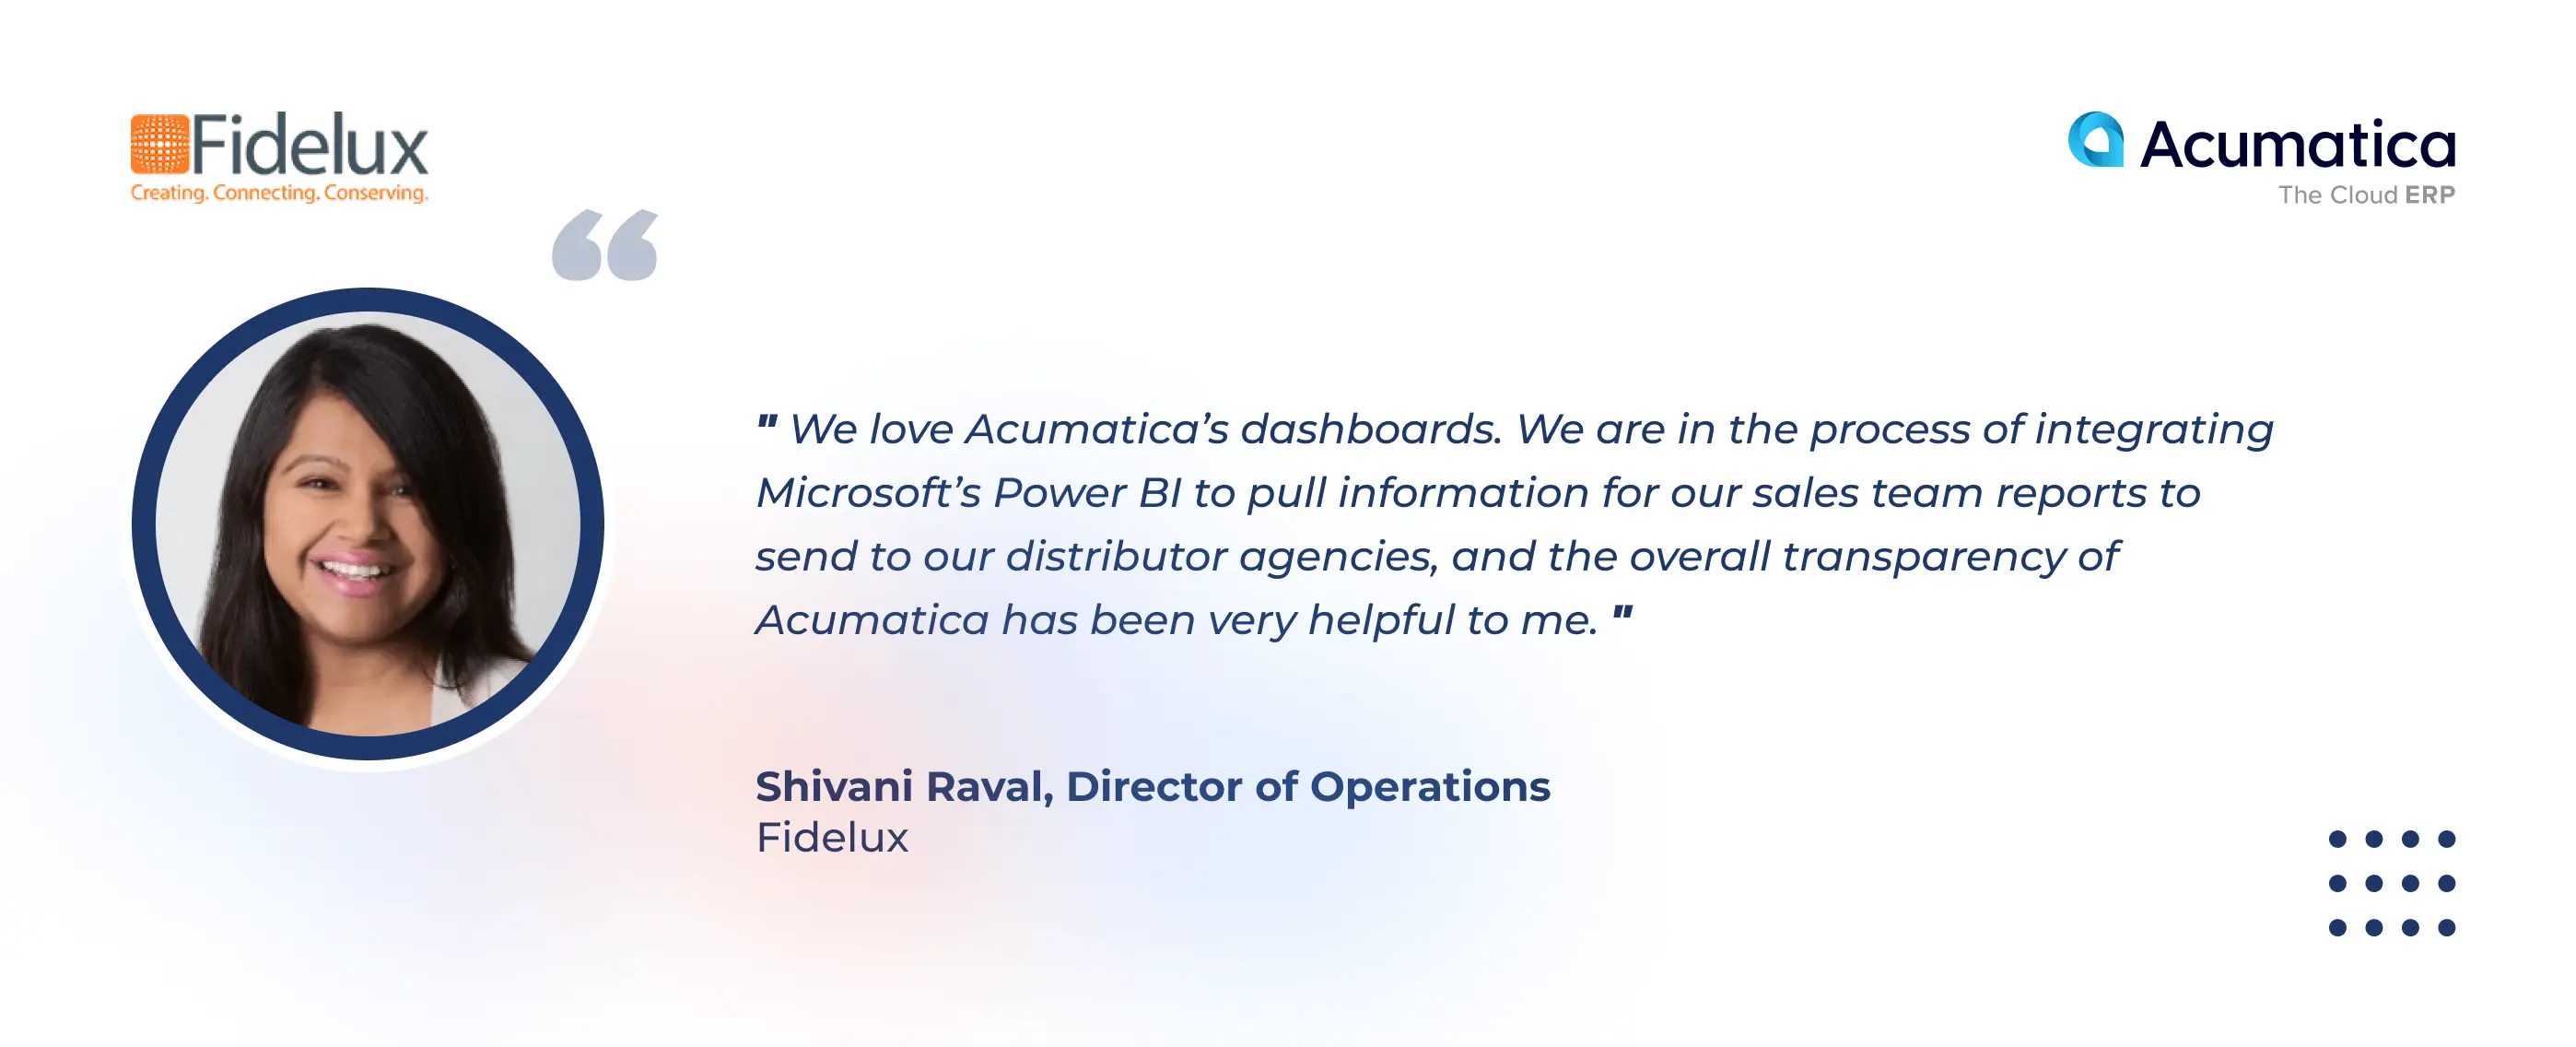 A quote of Shivani Raval, Director of operations at Fidelux, about Acumatica Cloud ERP